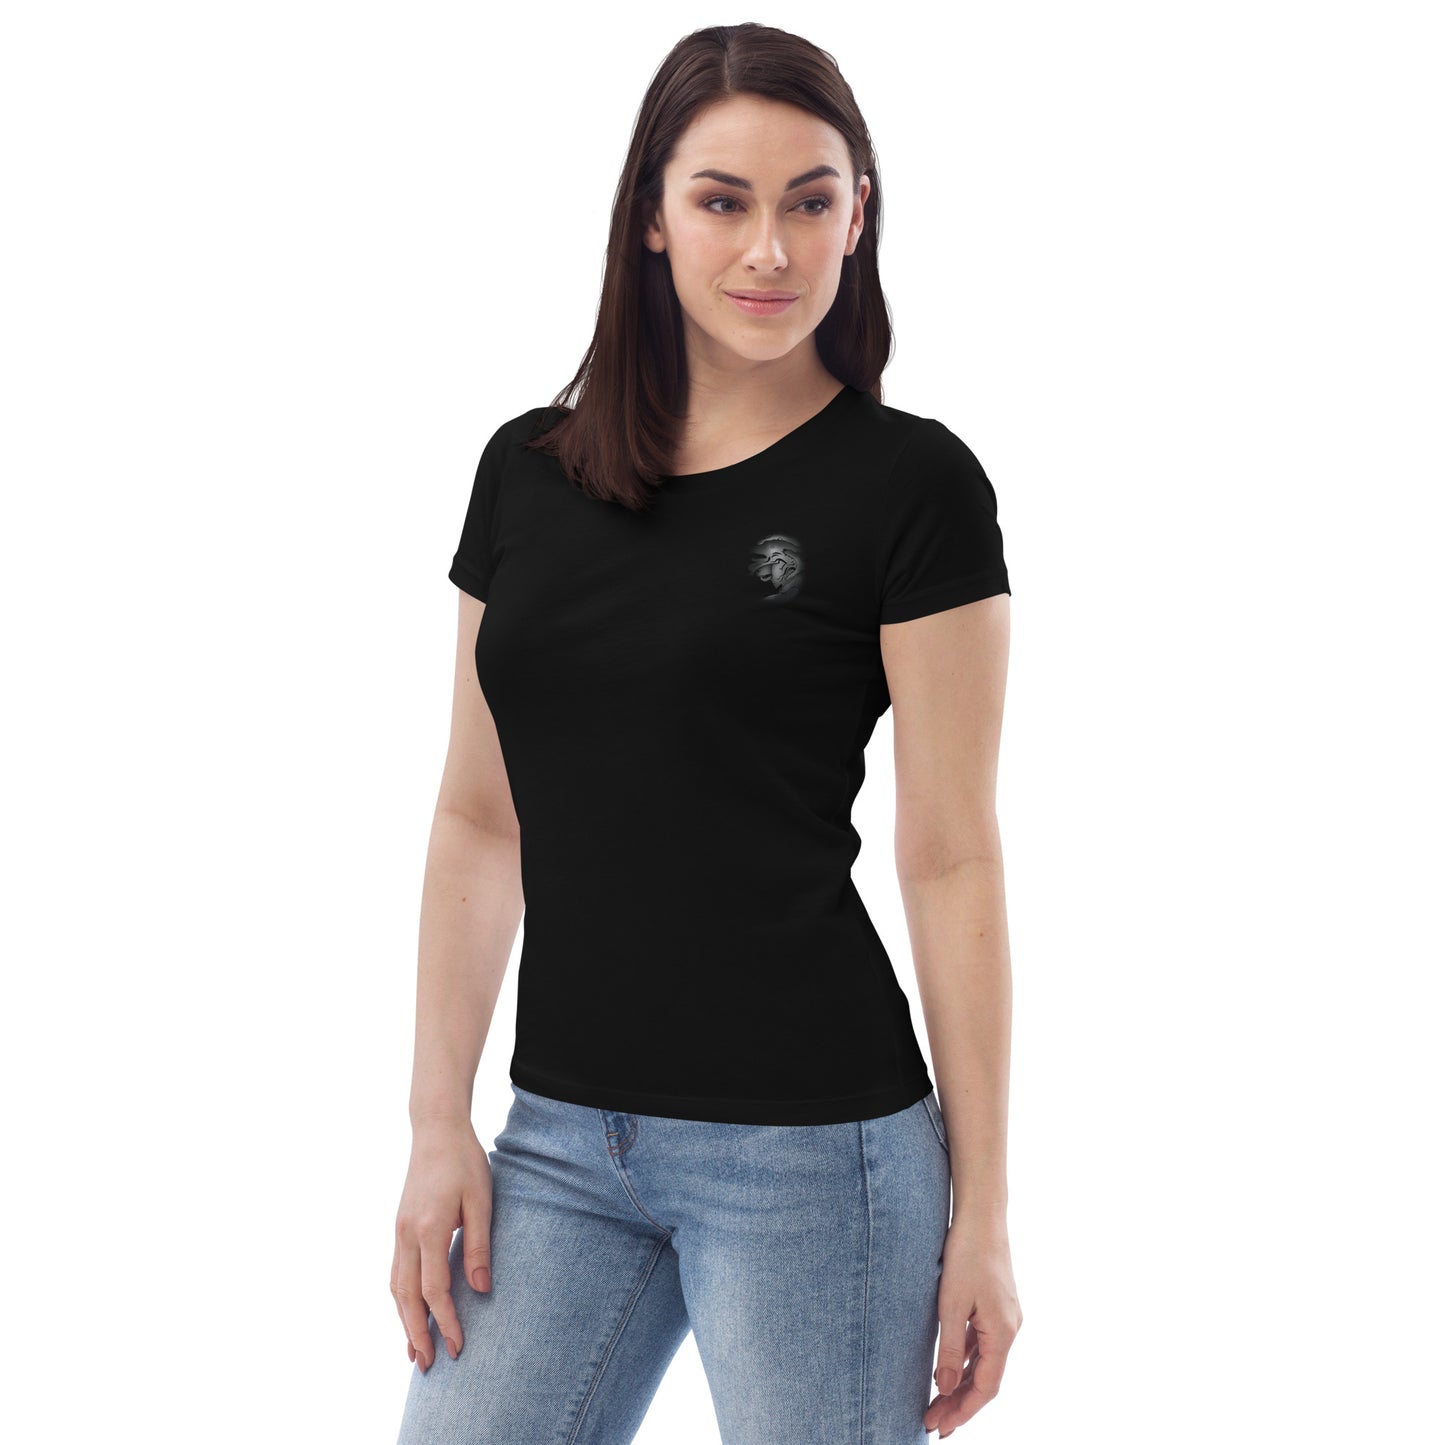 Women's fitted eco Logo tee